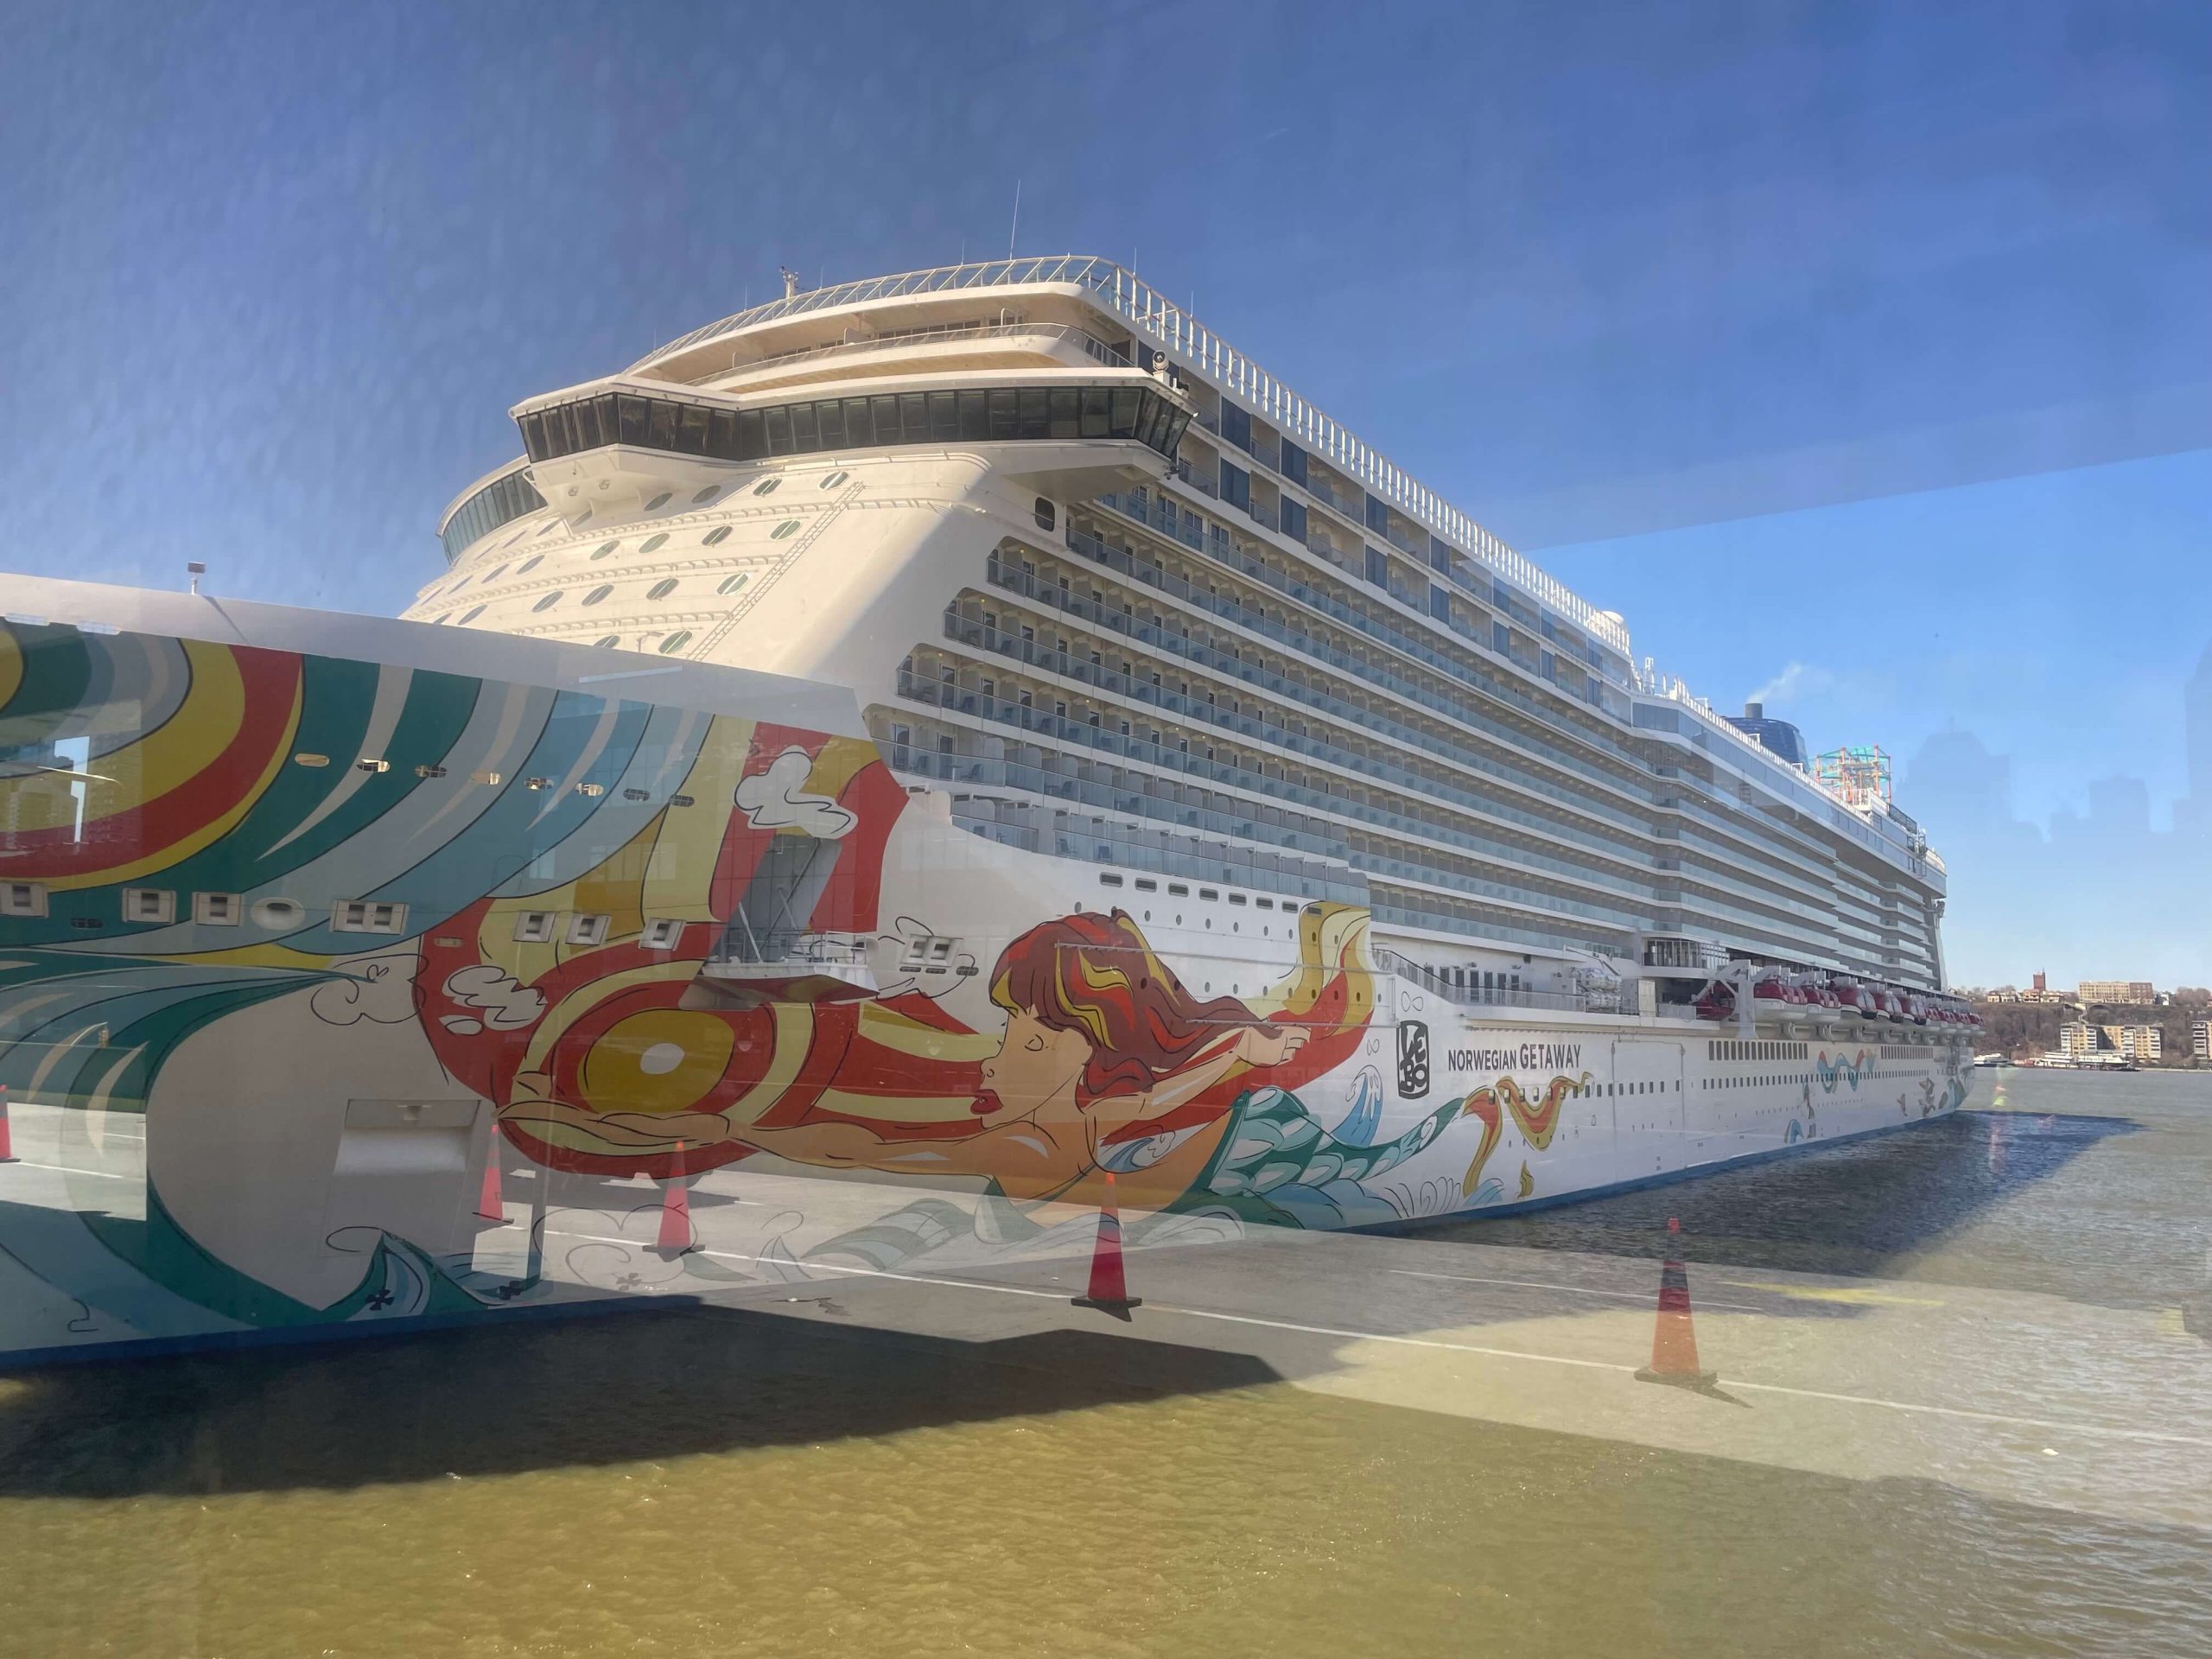 Norwegian Cruise Dress Code Explained (NCL) Wear When What Why